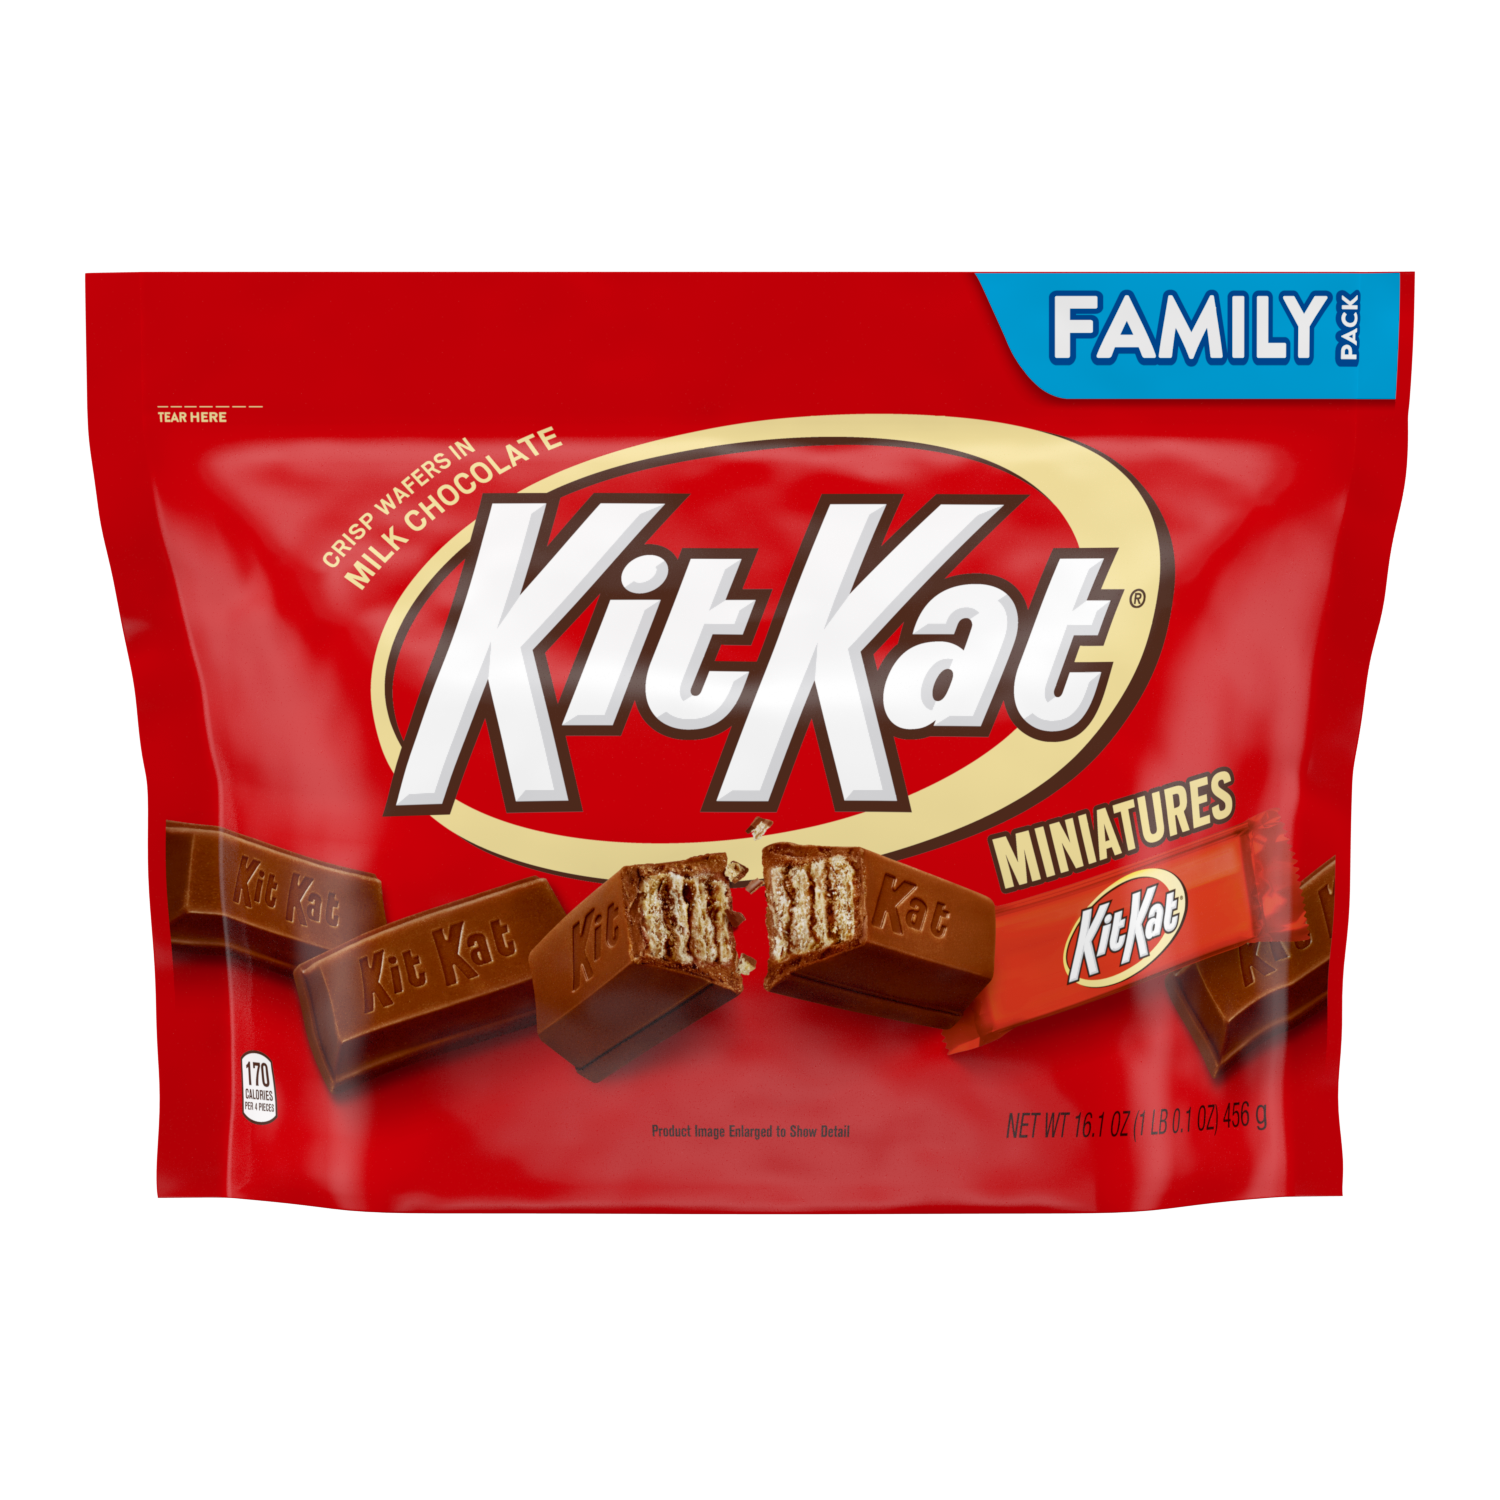 KIT KAT® Miniatures Milk Chocolate Candy Bars, 16.1 oz bag - Front of Package